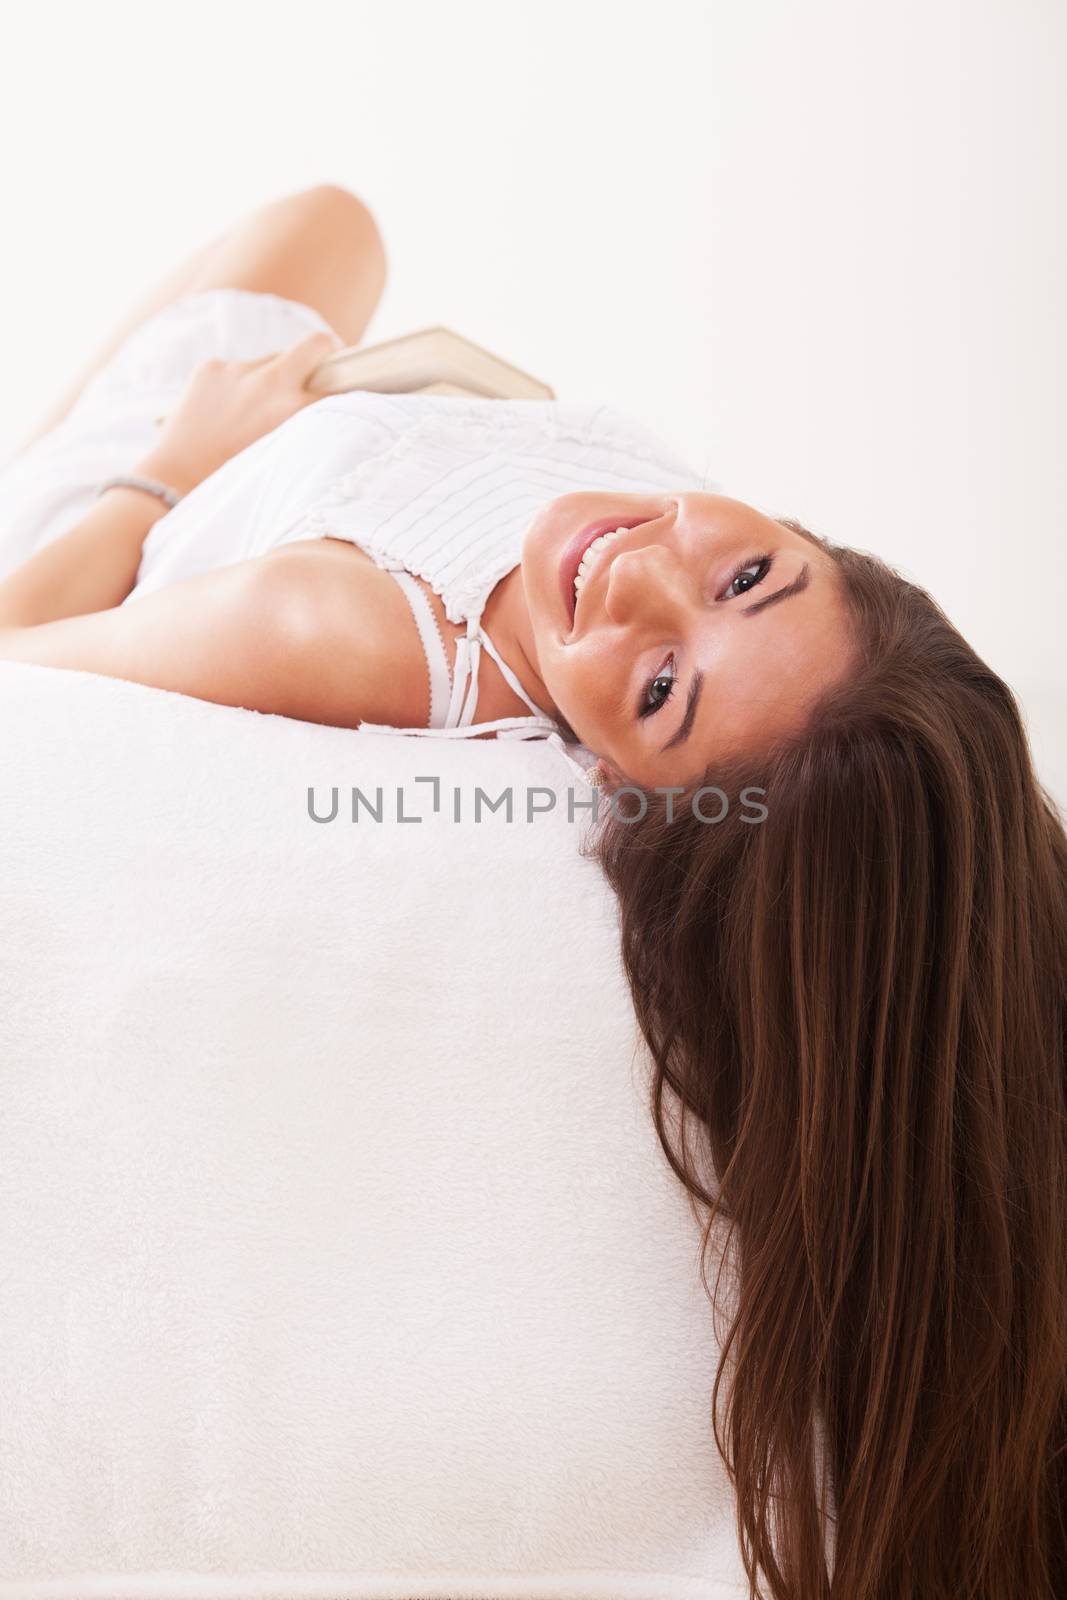 Beautiful young woman lying on bed and smiling.